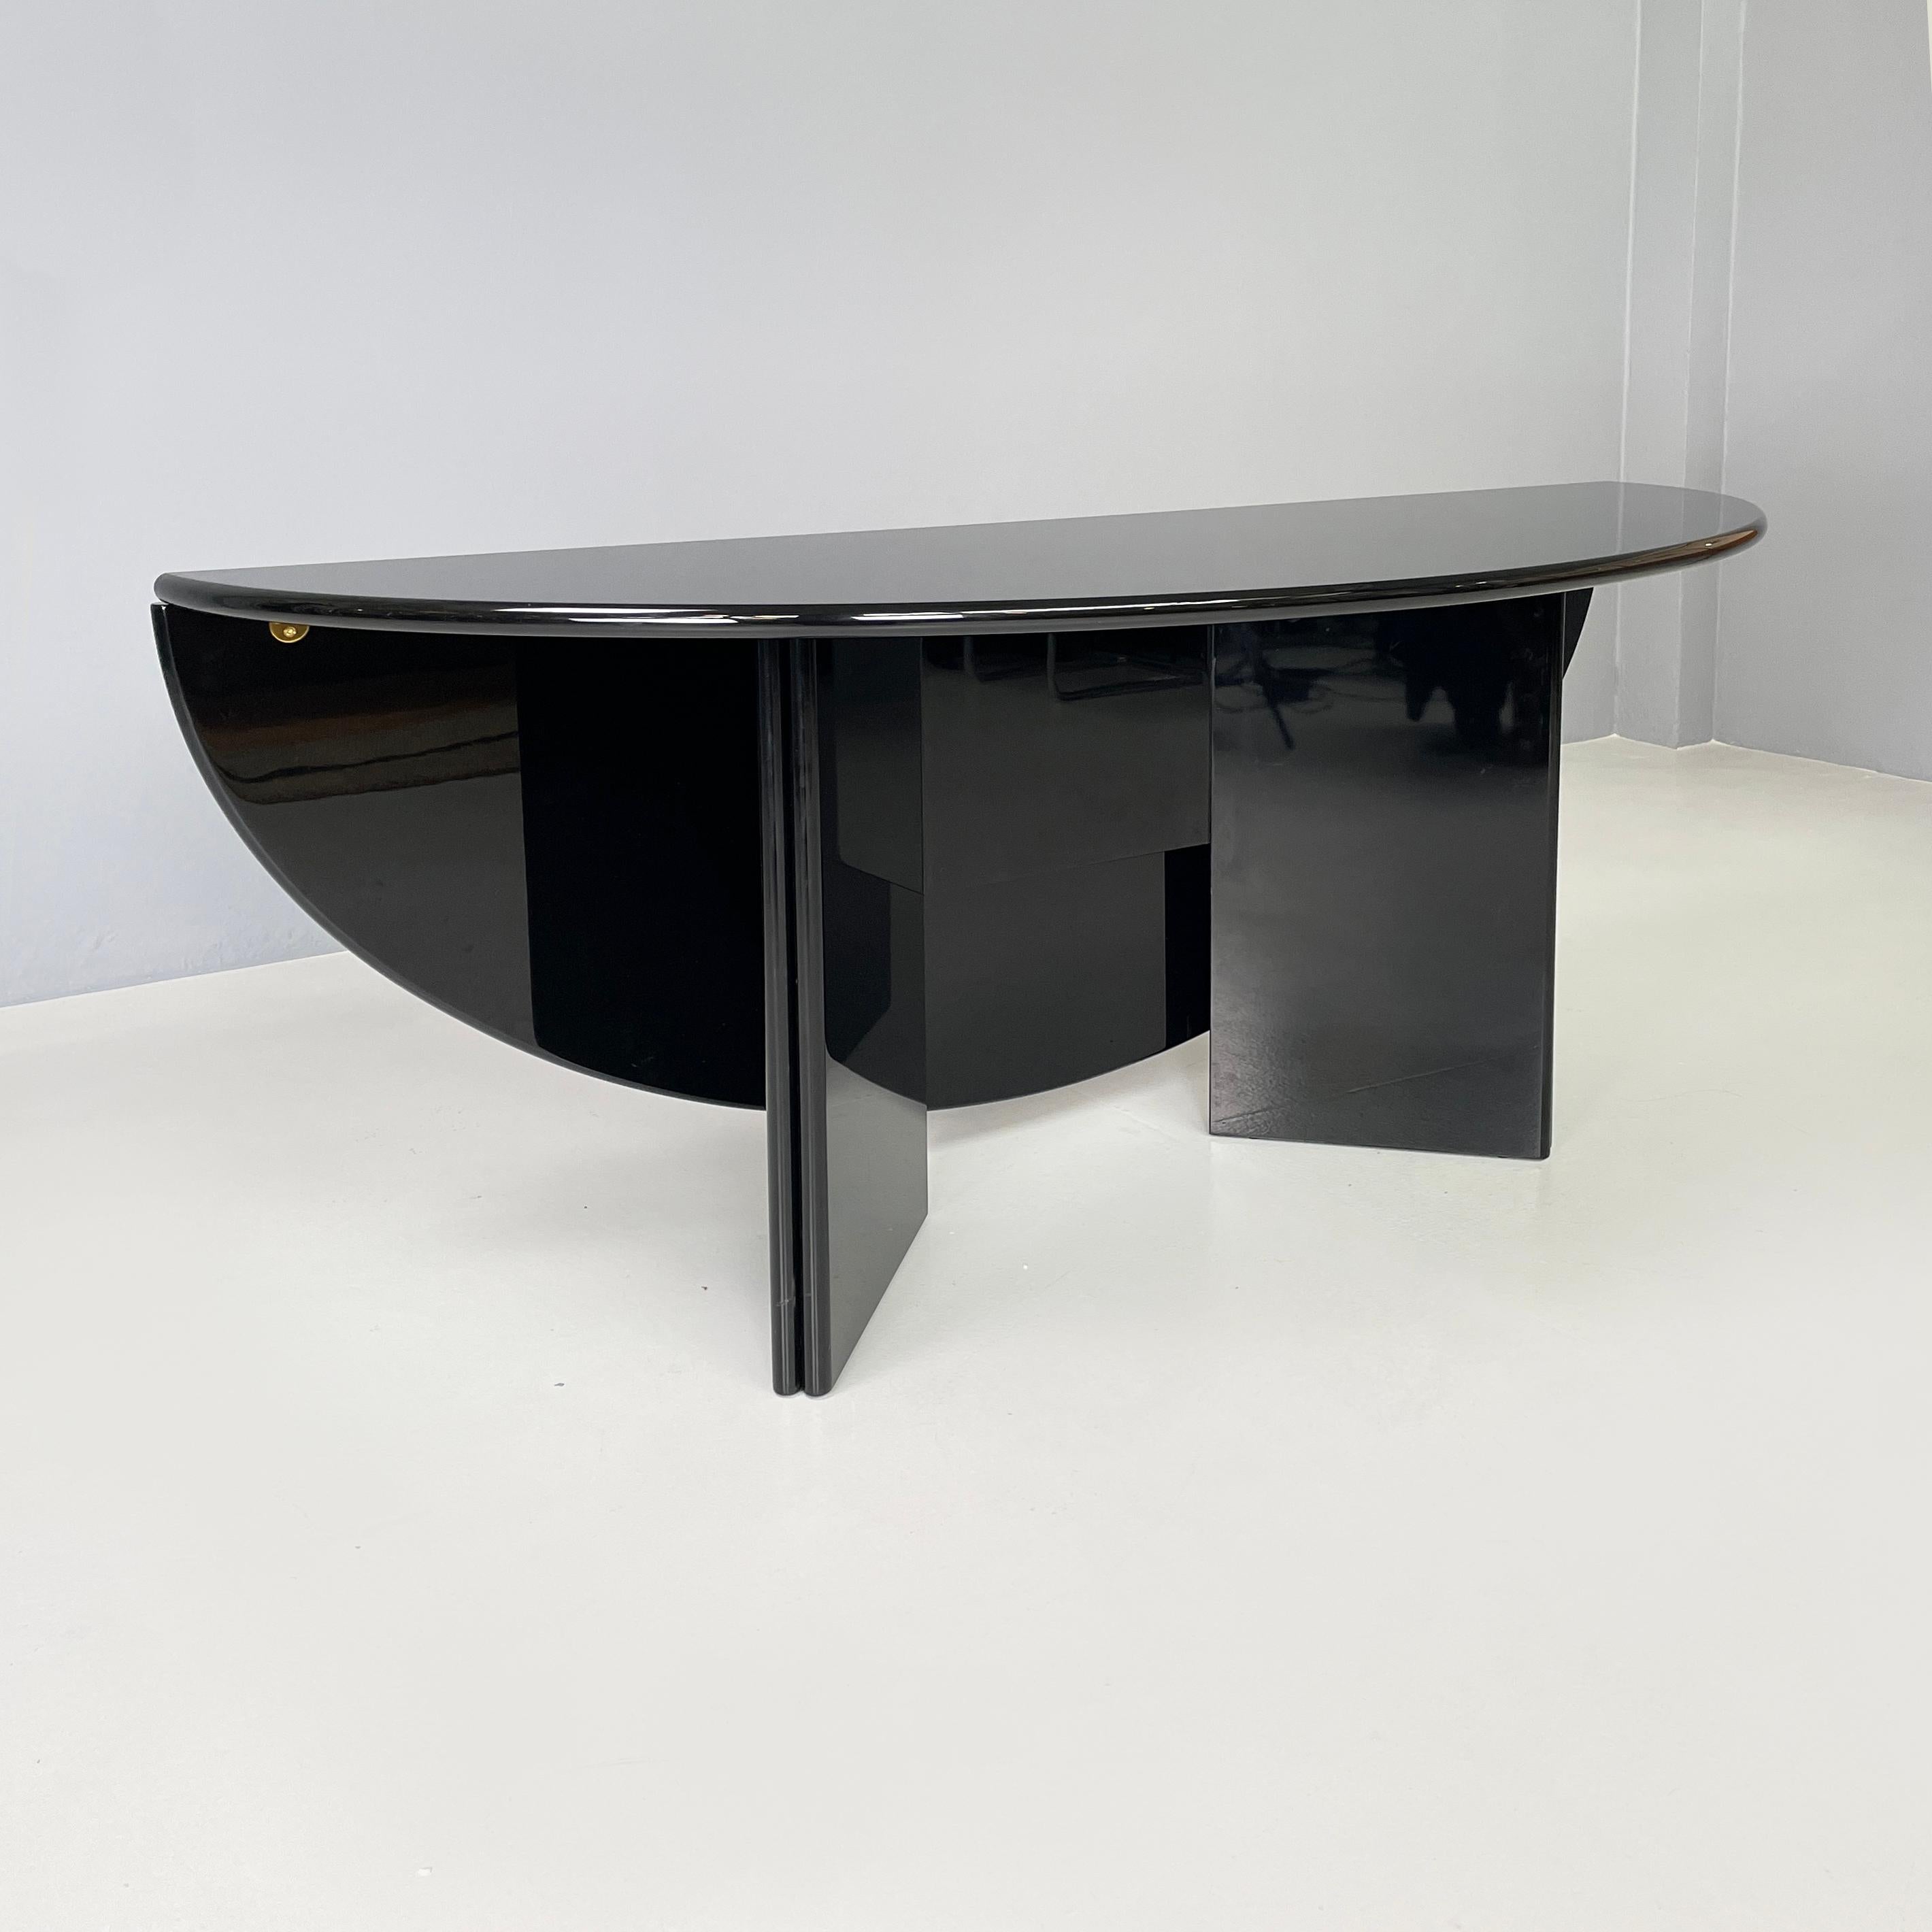 Italian modern Black Dining table or console by Kazuhide  Takahama for Cassina, 1970s
Dining table or console mod. Antella in black lacquered wood. The particularity of the top which can be halved from oval through golden metal hinges, becoming